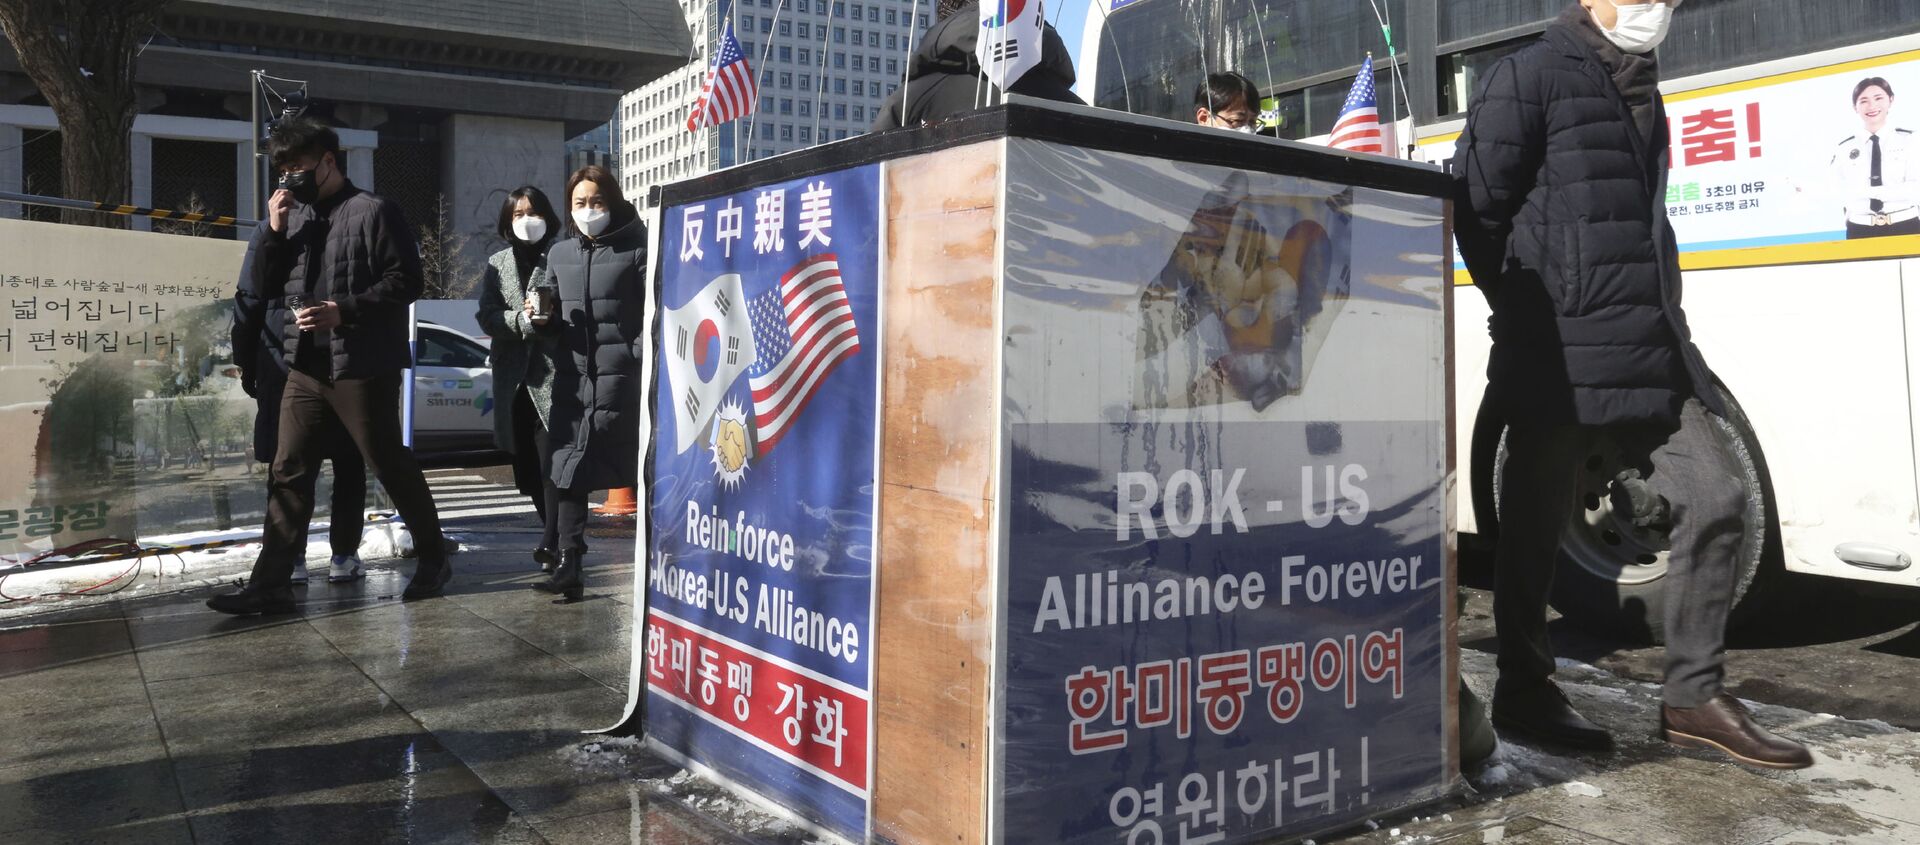 Banners to support the alliance between South Korea and the U.S. are displayed near the U.S. Embassy in Seoul, South Korea, Thursday, Feb. 4, 2021. - Sputnik International, 1920, 01.05.2021